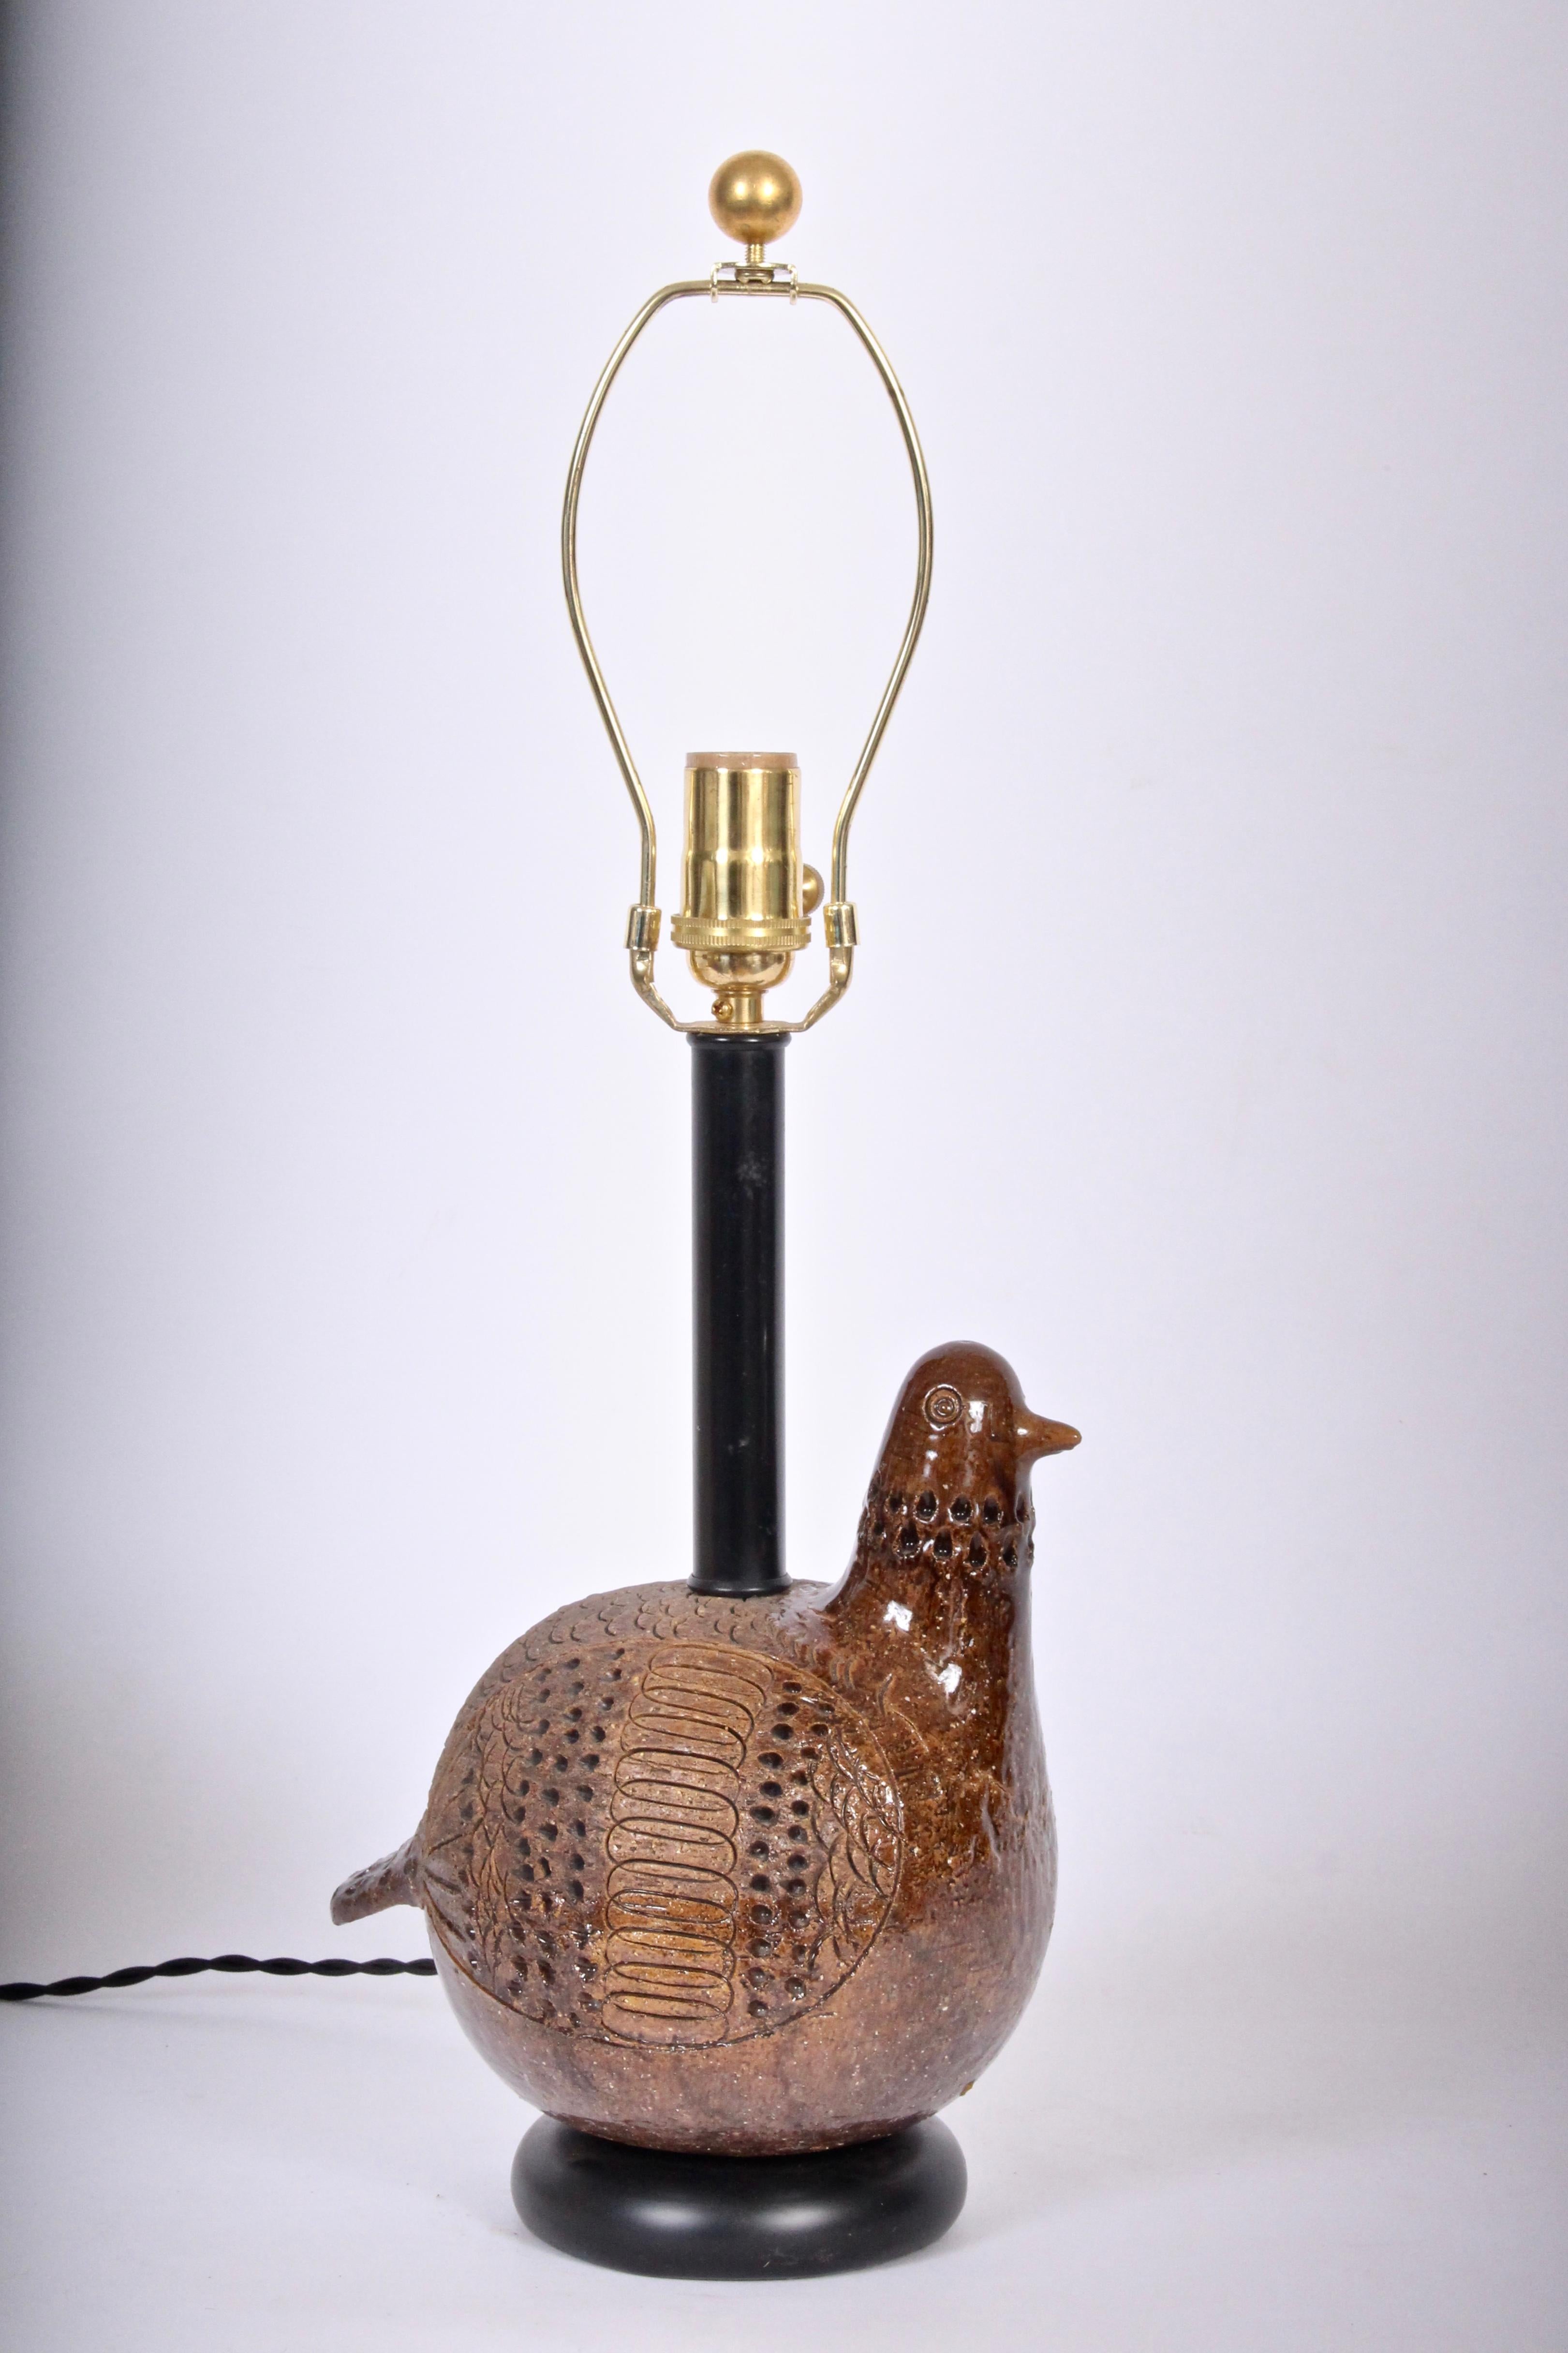 Handcrafted Aldo Londi for Bitossi Incised Earthen Partridge Glazed Ceramic Table Lamp. Handcrafted bird form in Brown clay with partial gloss glaze highlighted with original Black neck and base. 16 H to top of socket. Shade shown for display only